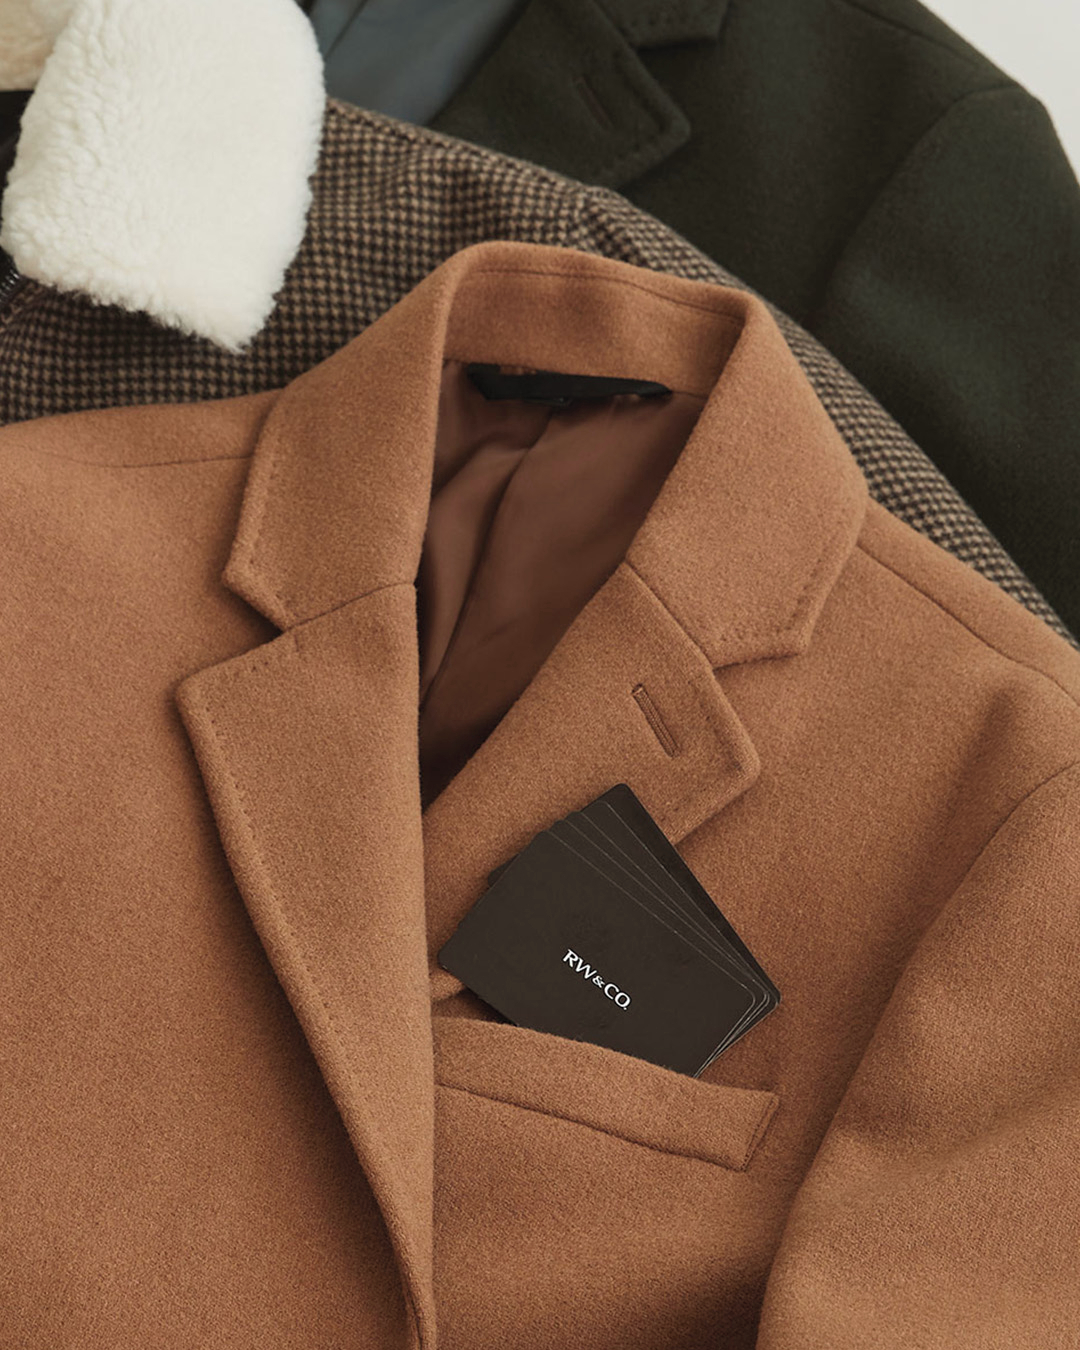 A tan RW&Co coat rests on top of other clothing.